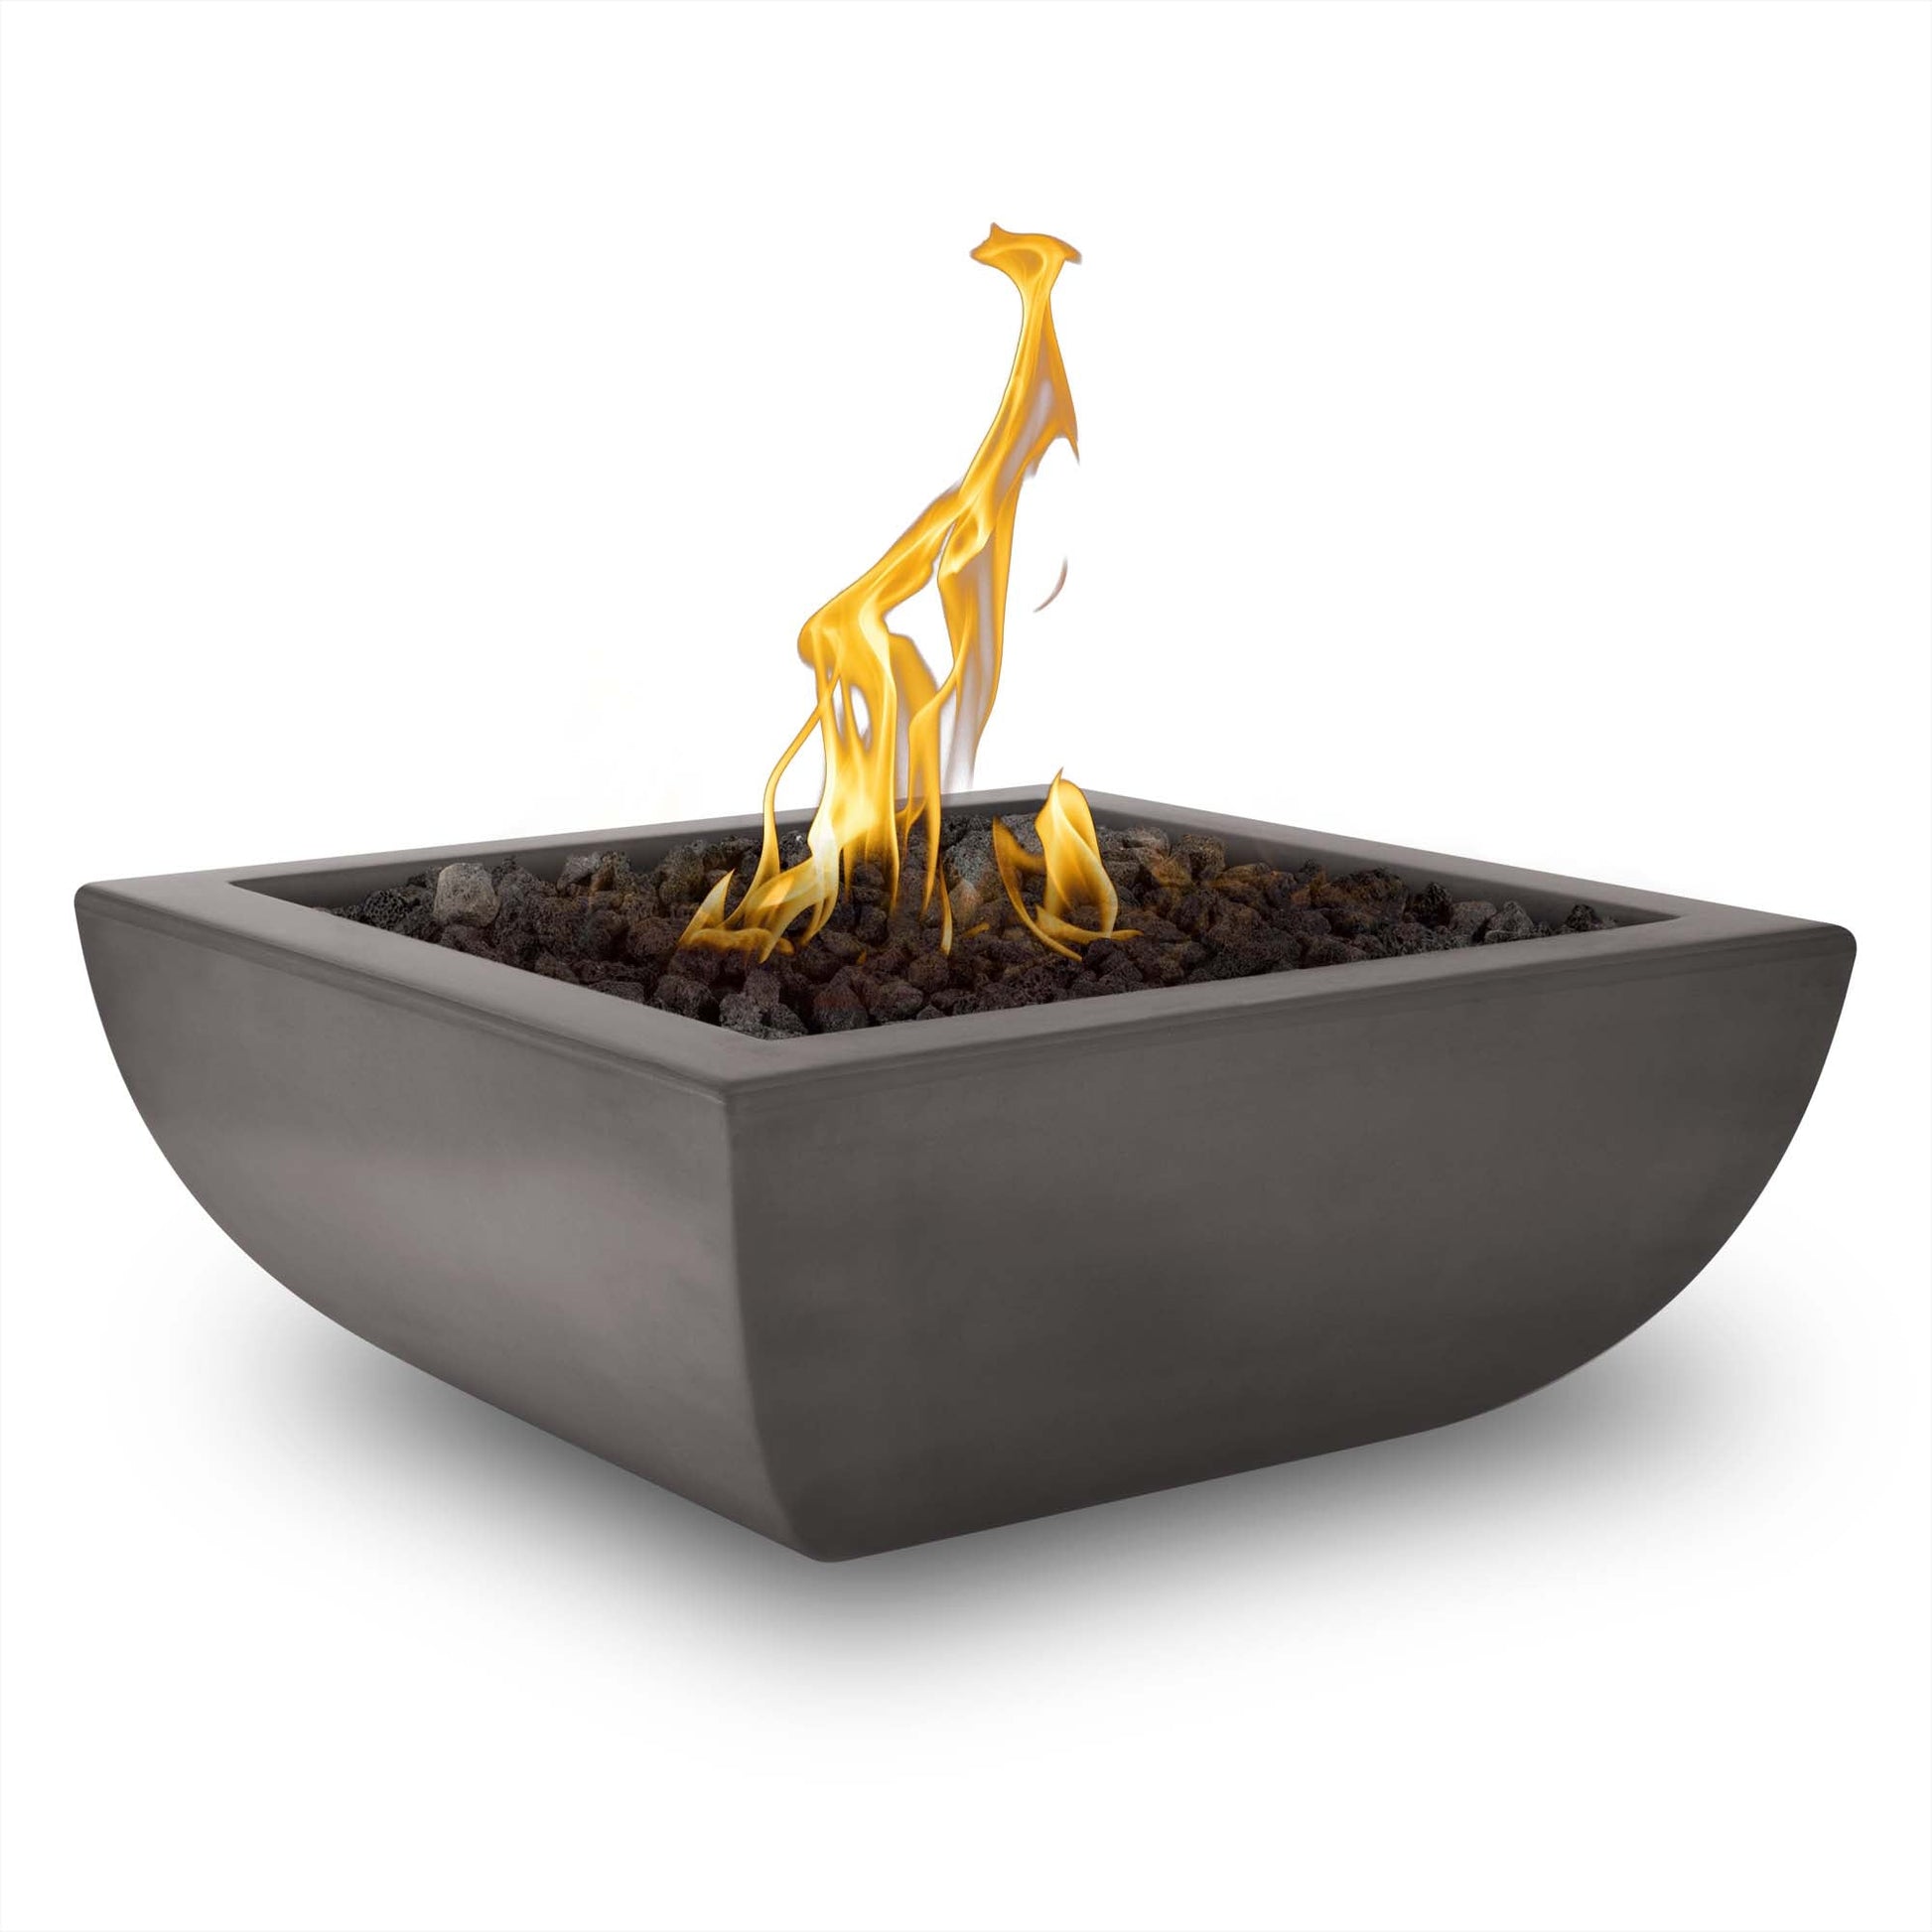 The Outdoor Plus Square Avalon 30" Rustic White GFRC Concrete Liquid Propane Fire Bowl with Match Lit with Flame Sense Ignition